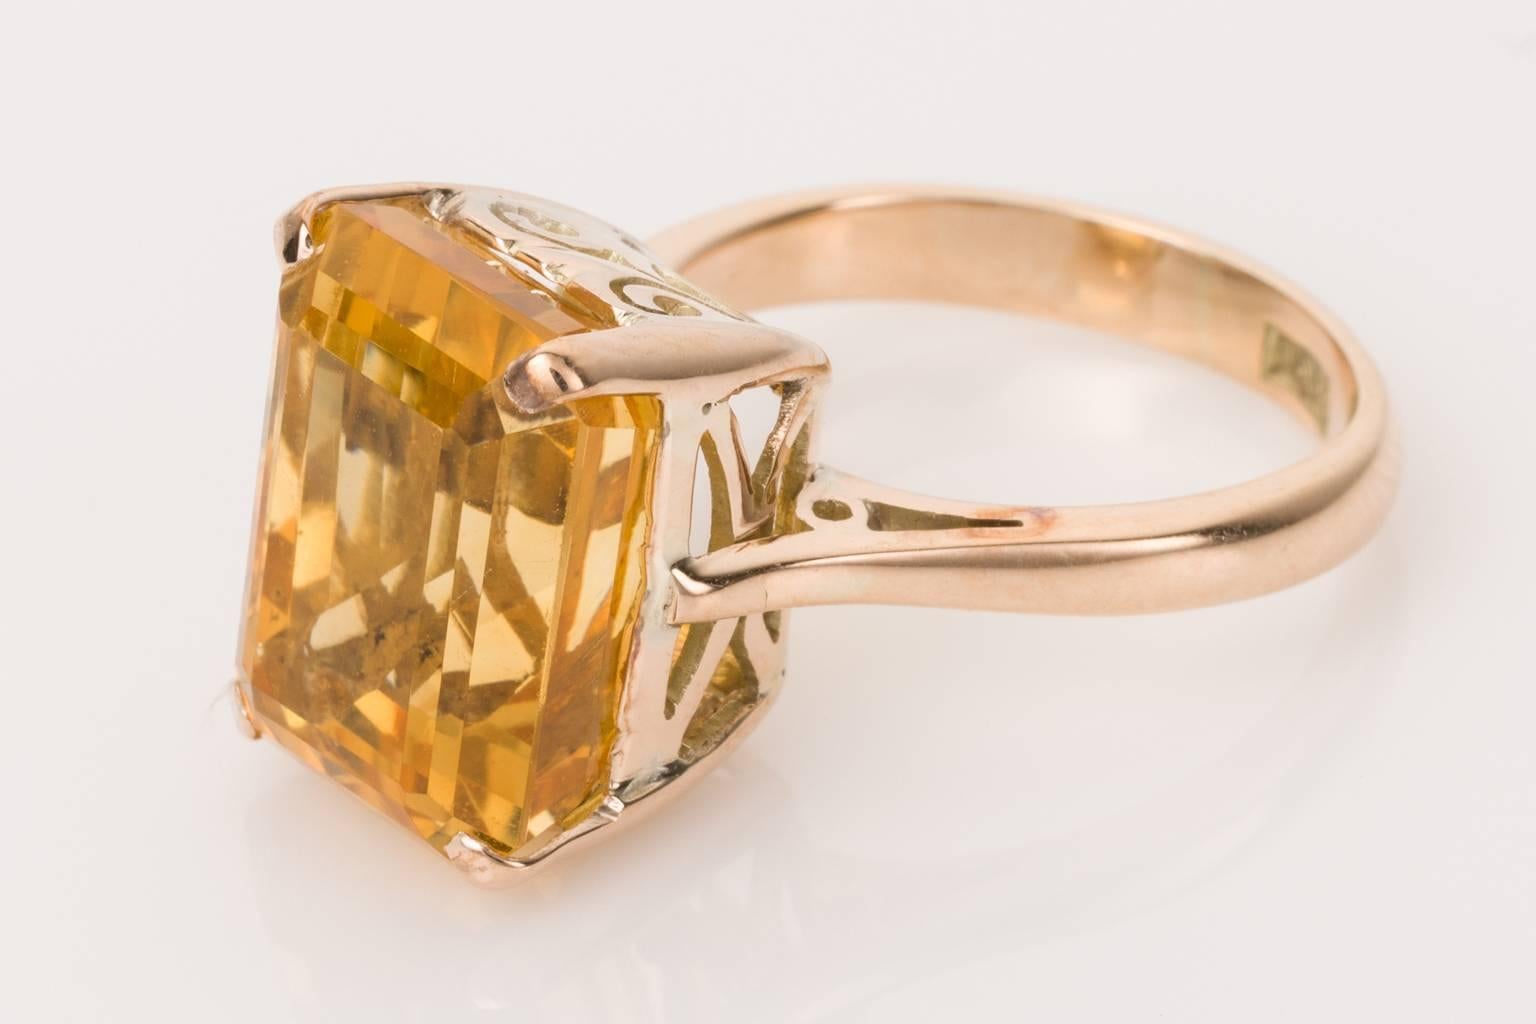 Victorian 14 Carat Yellow Gold Emerald Cut Citrine Cocktail Ring